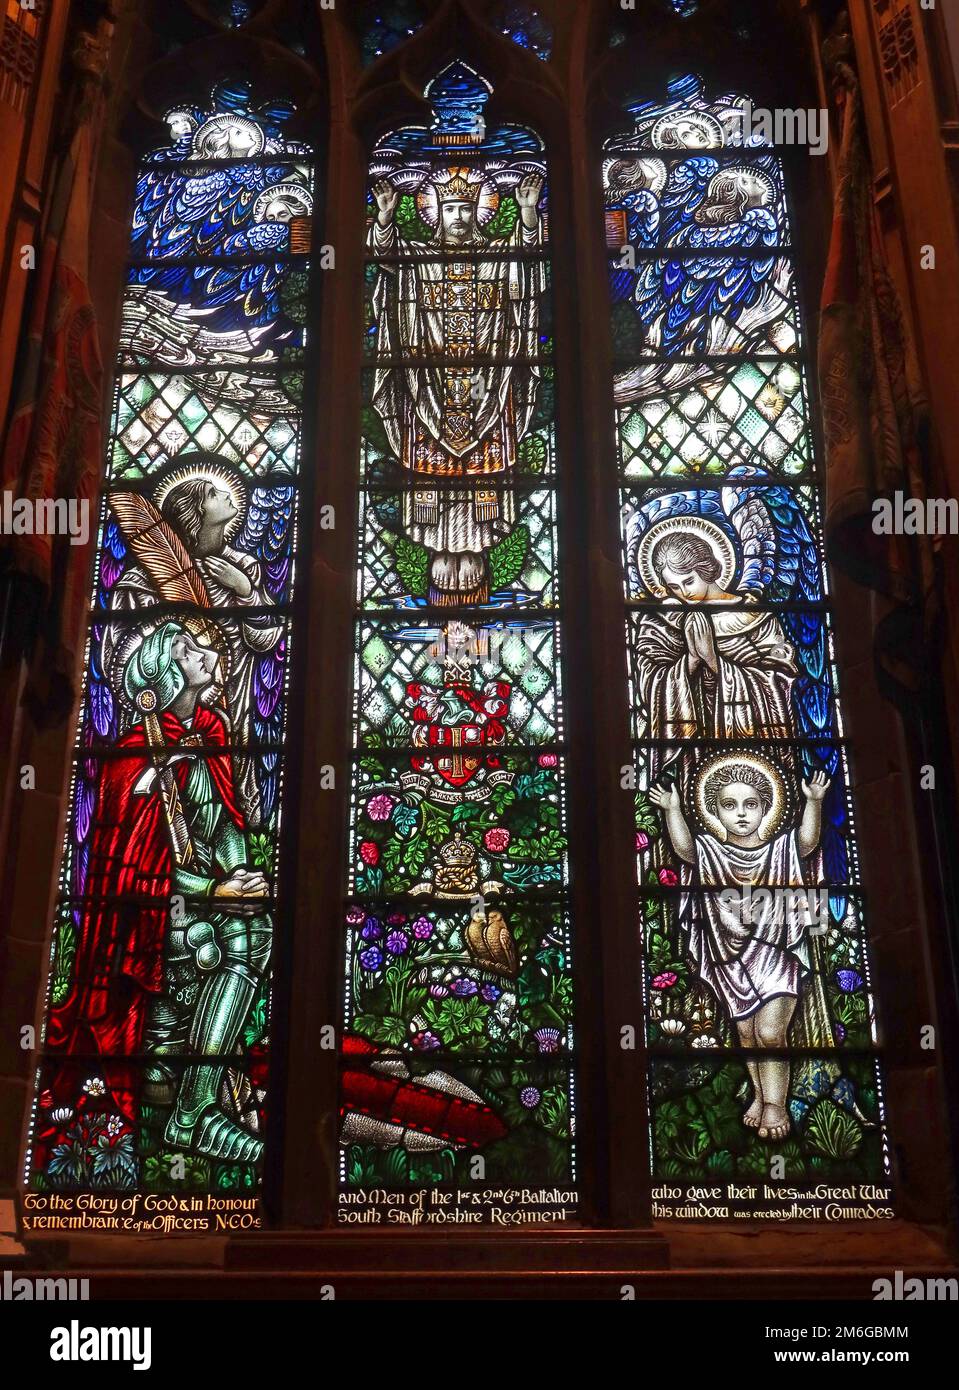 In honour & remembrance of the officers NCOs and men of the 1st, 2nd, 6th, Battalion South Staffordshire regiment - stained glass Stock Photo